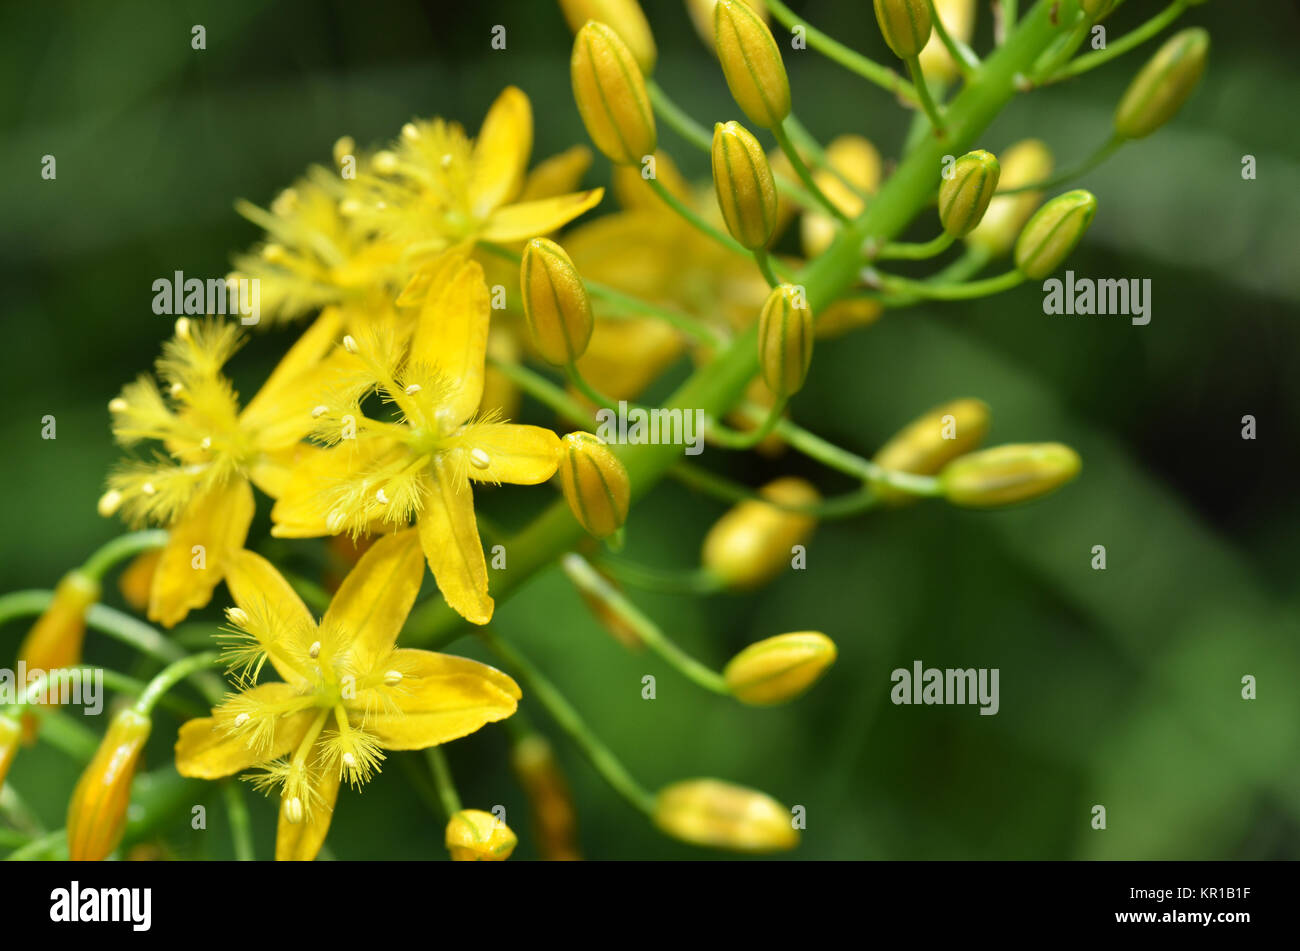 Bulbine natalensis also known with common name Bulbine Stock Photo